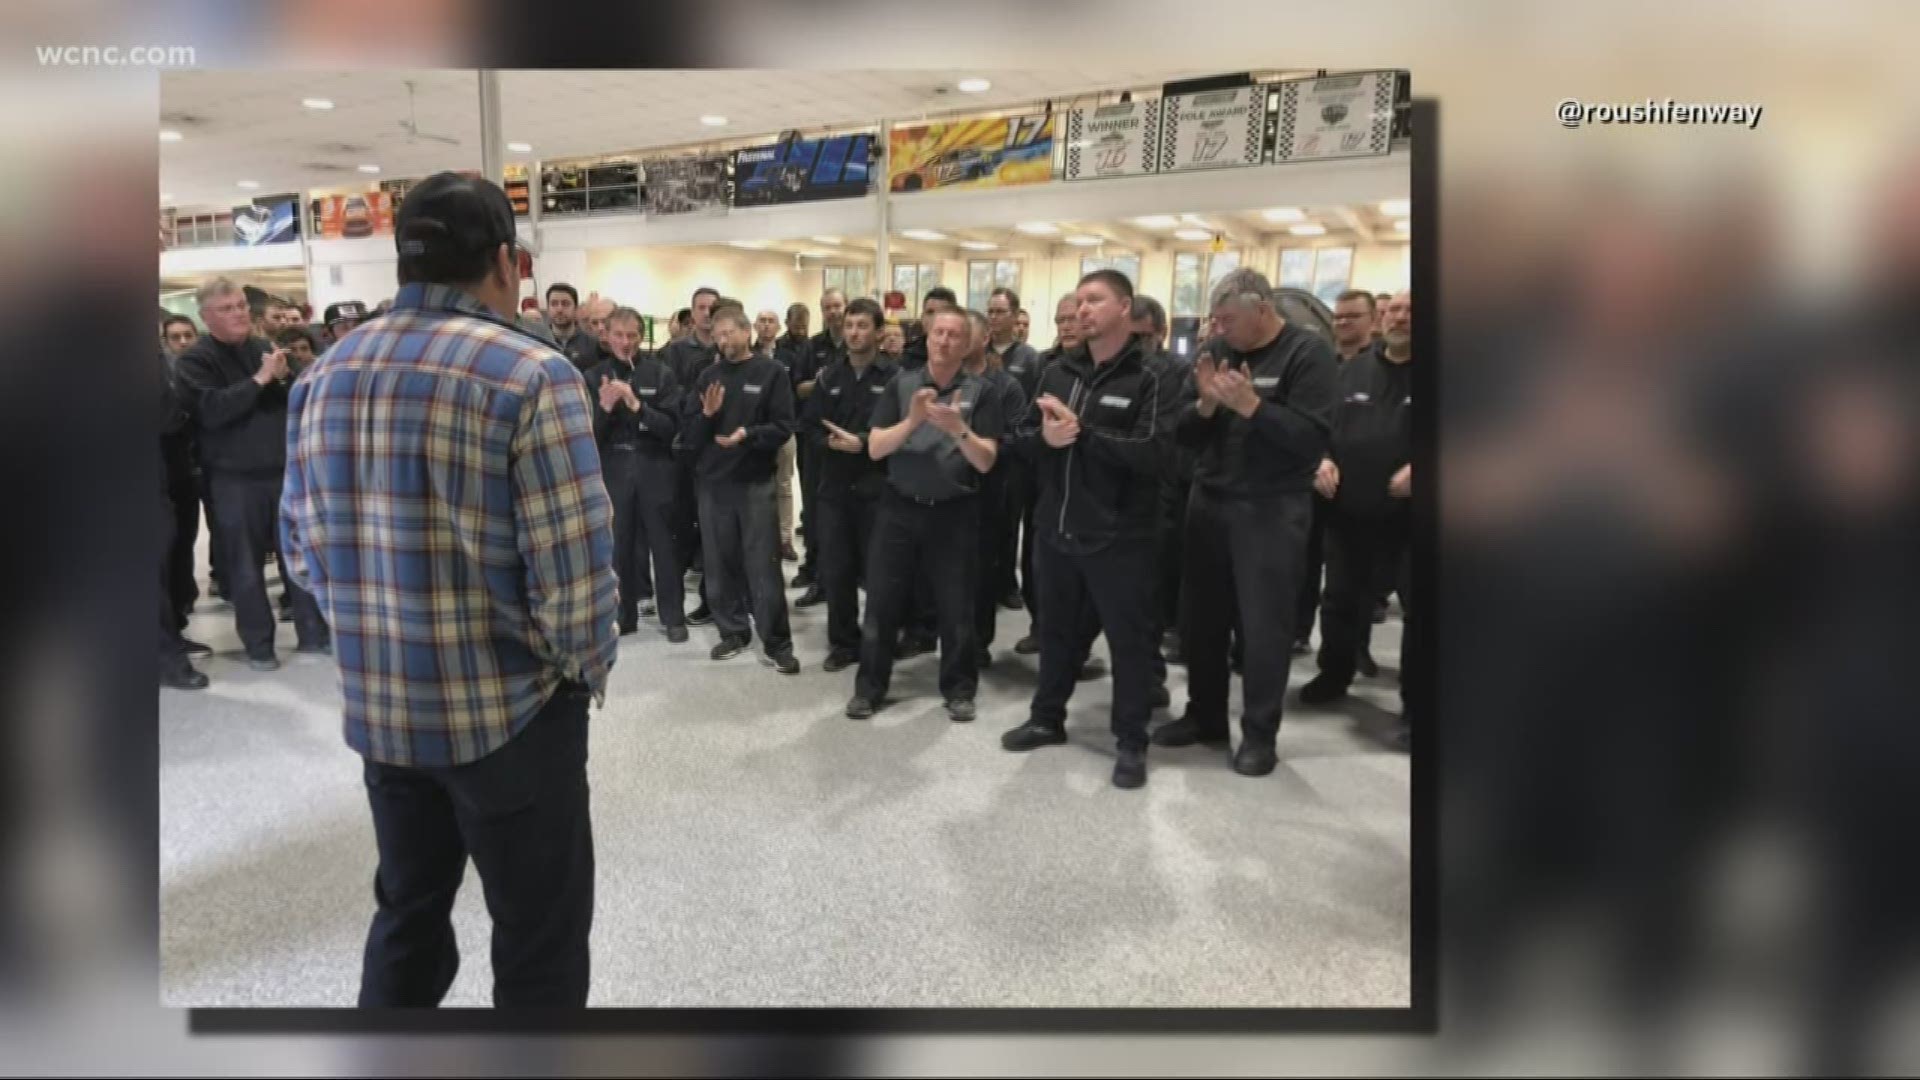 Roush Fenway Racing posted pictures of Ryan Newman showing up at the shop in Charlotte. His co-workers gave him a standing ovation.